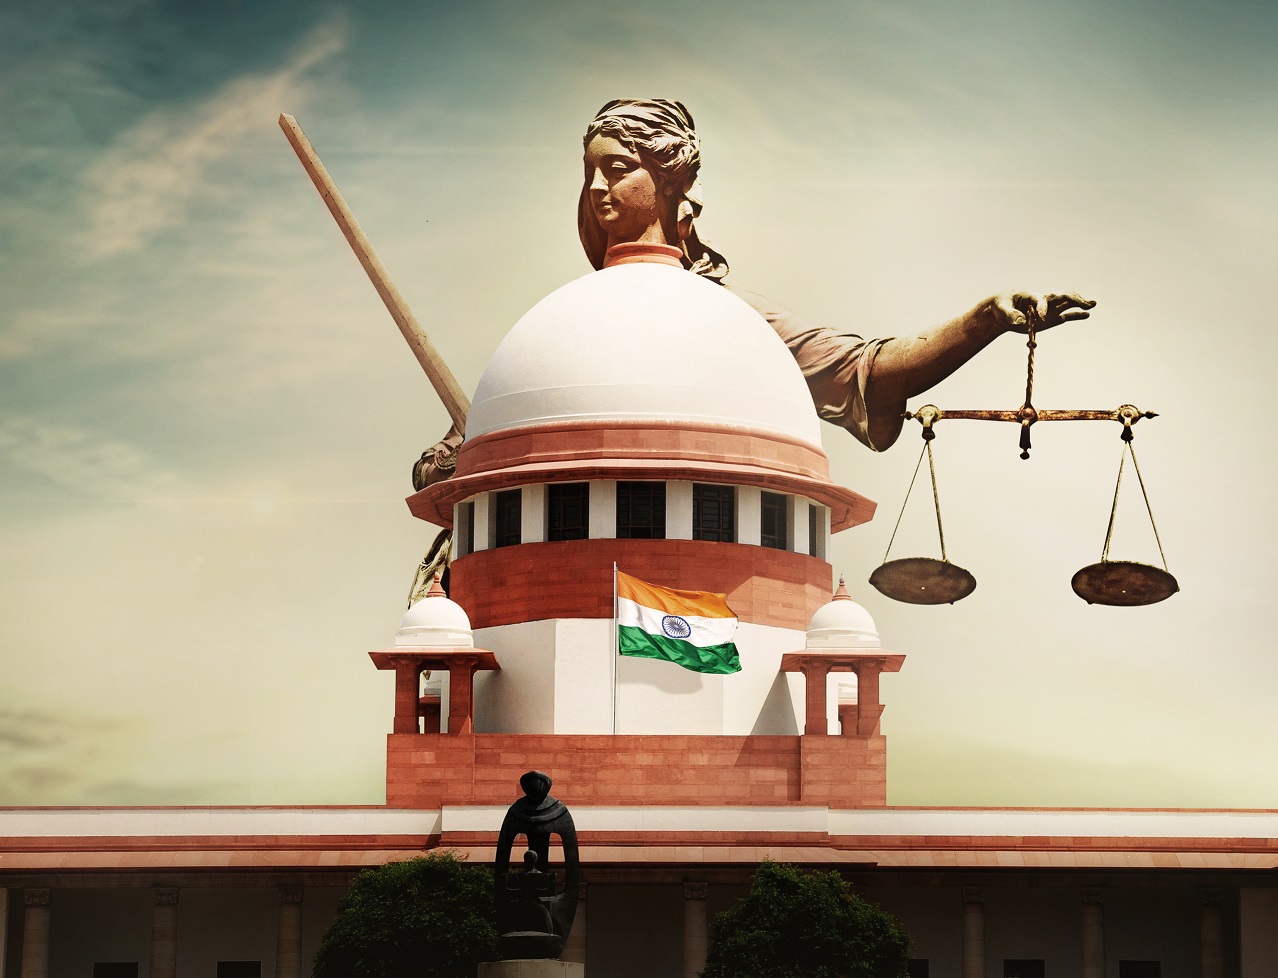 India must embrace the benefits of an open legal market